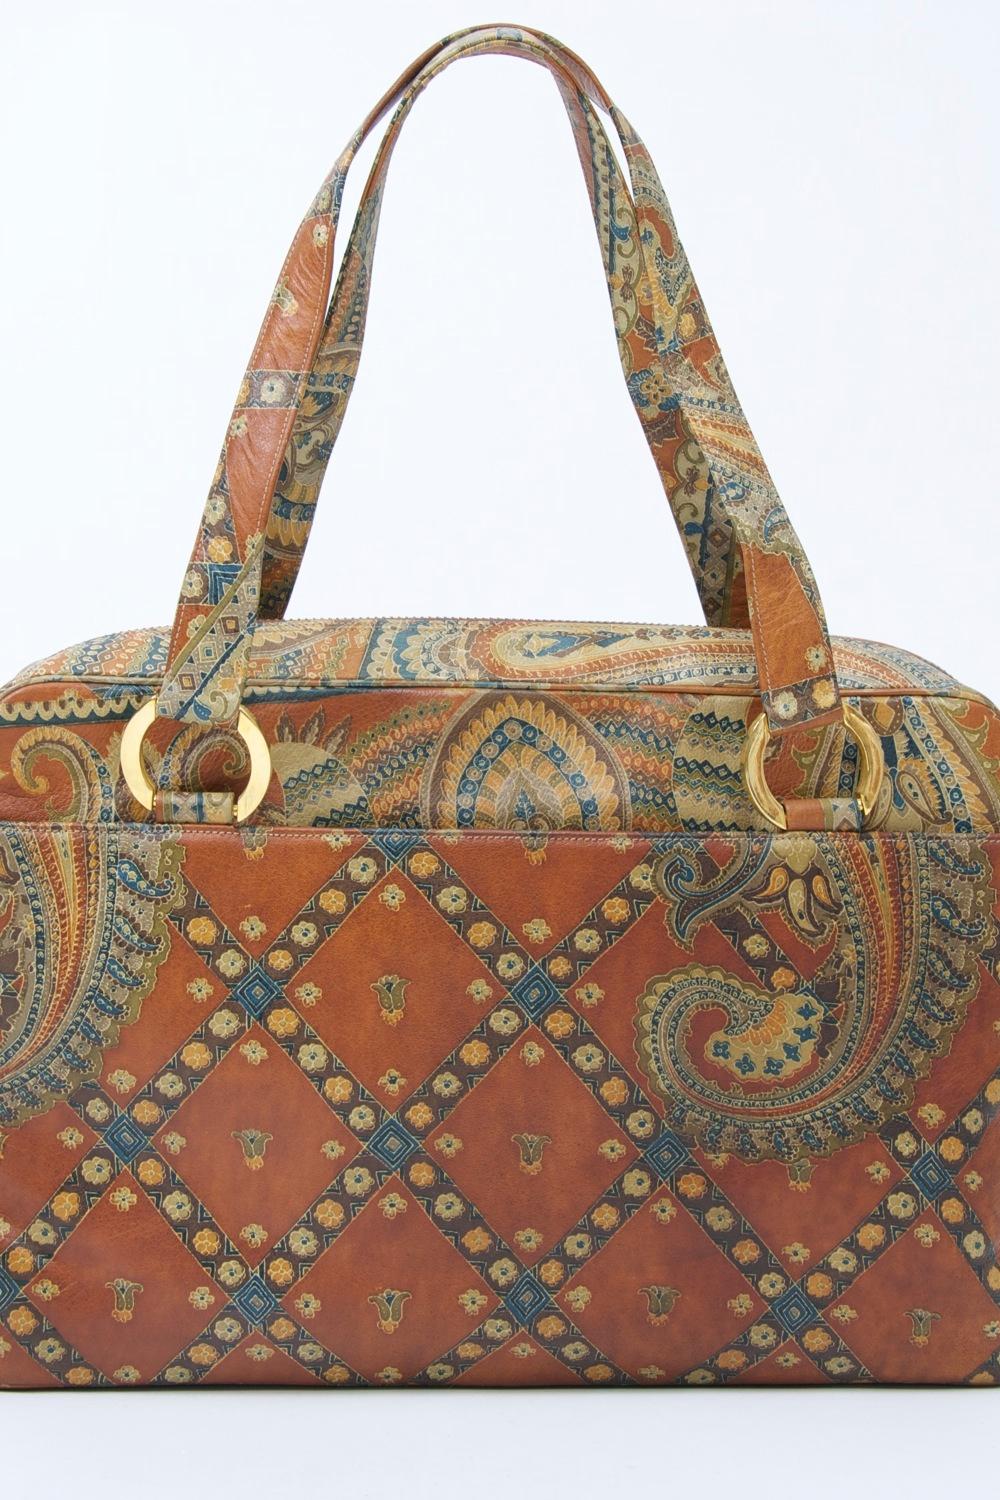 MM (Morris Moskowitz) was one of America's best handbag producers during the mid twentieth century. This example features an innovative leather printing technique based on the paisley design. The large tote-style bag has two matching handles